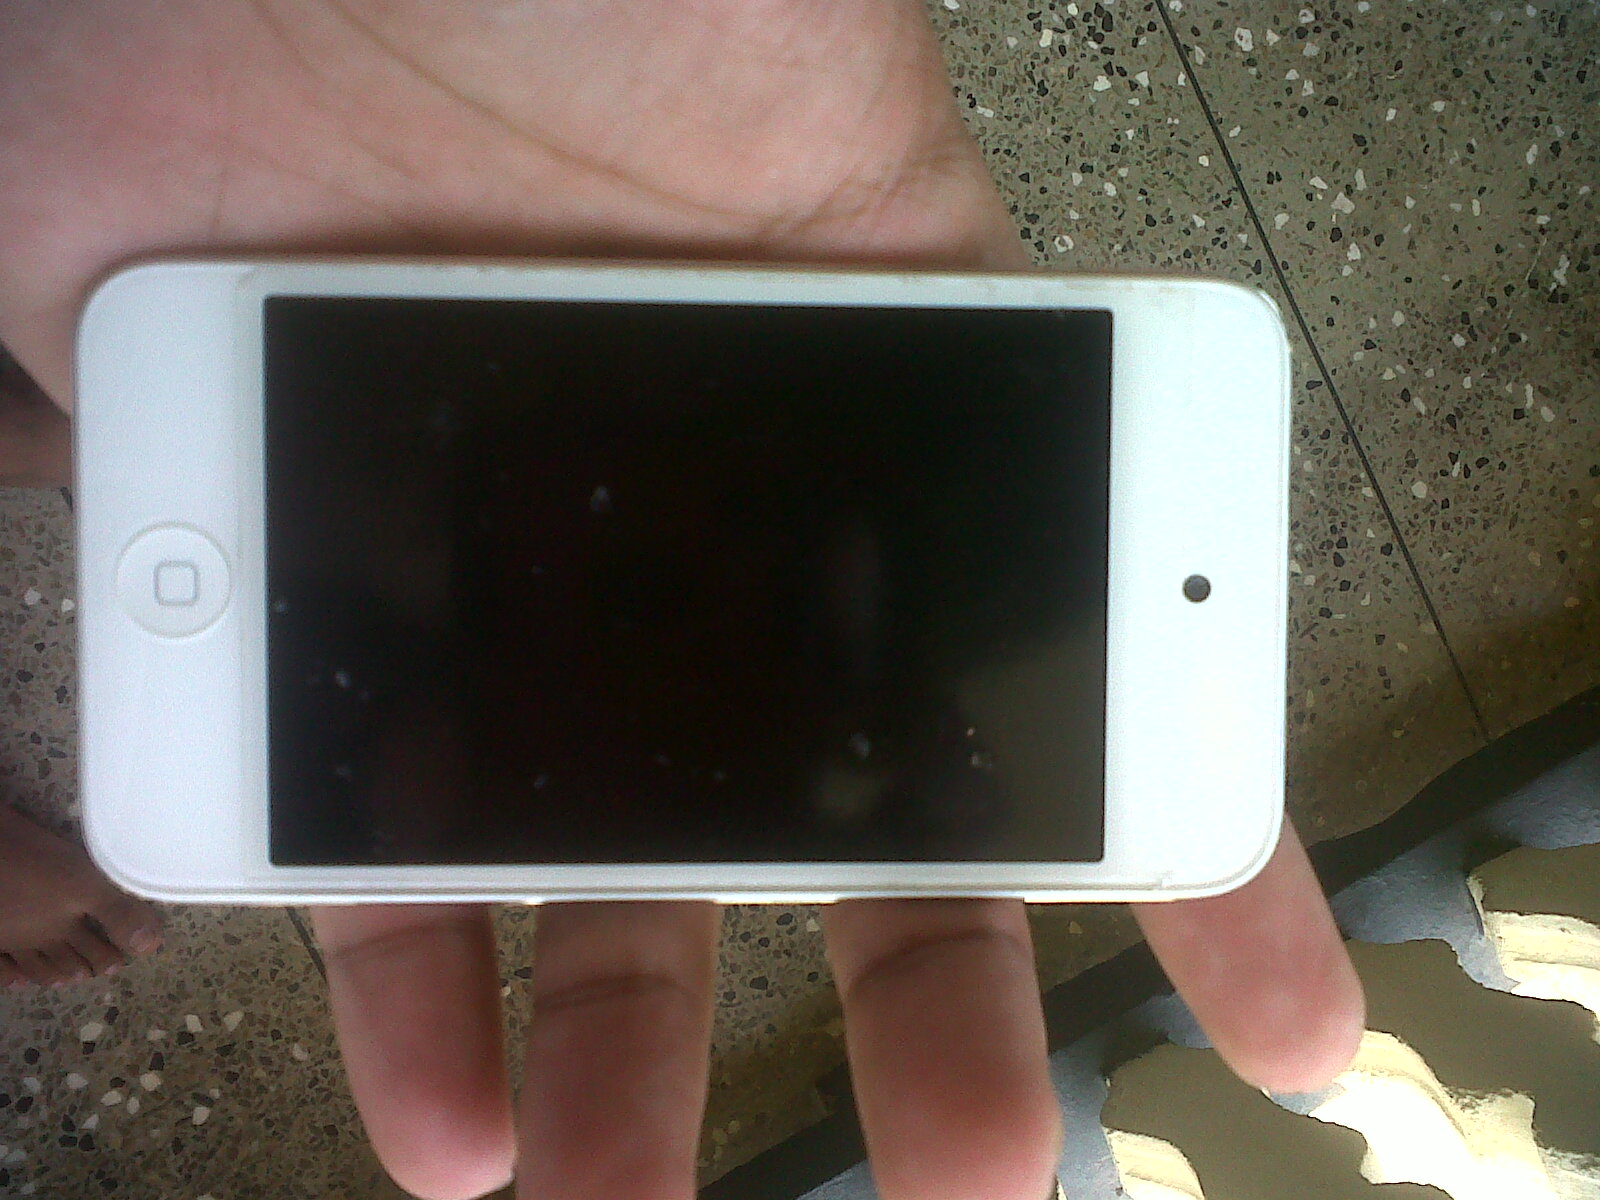 Ipod touch 4th gen 8gb for sale. $1400 (front and rear cameras) call ...